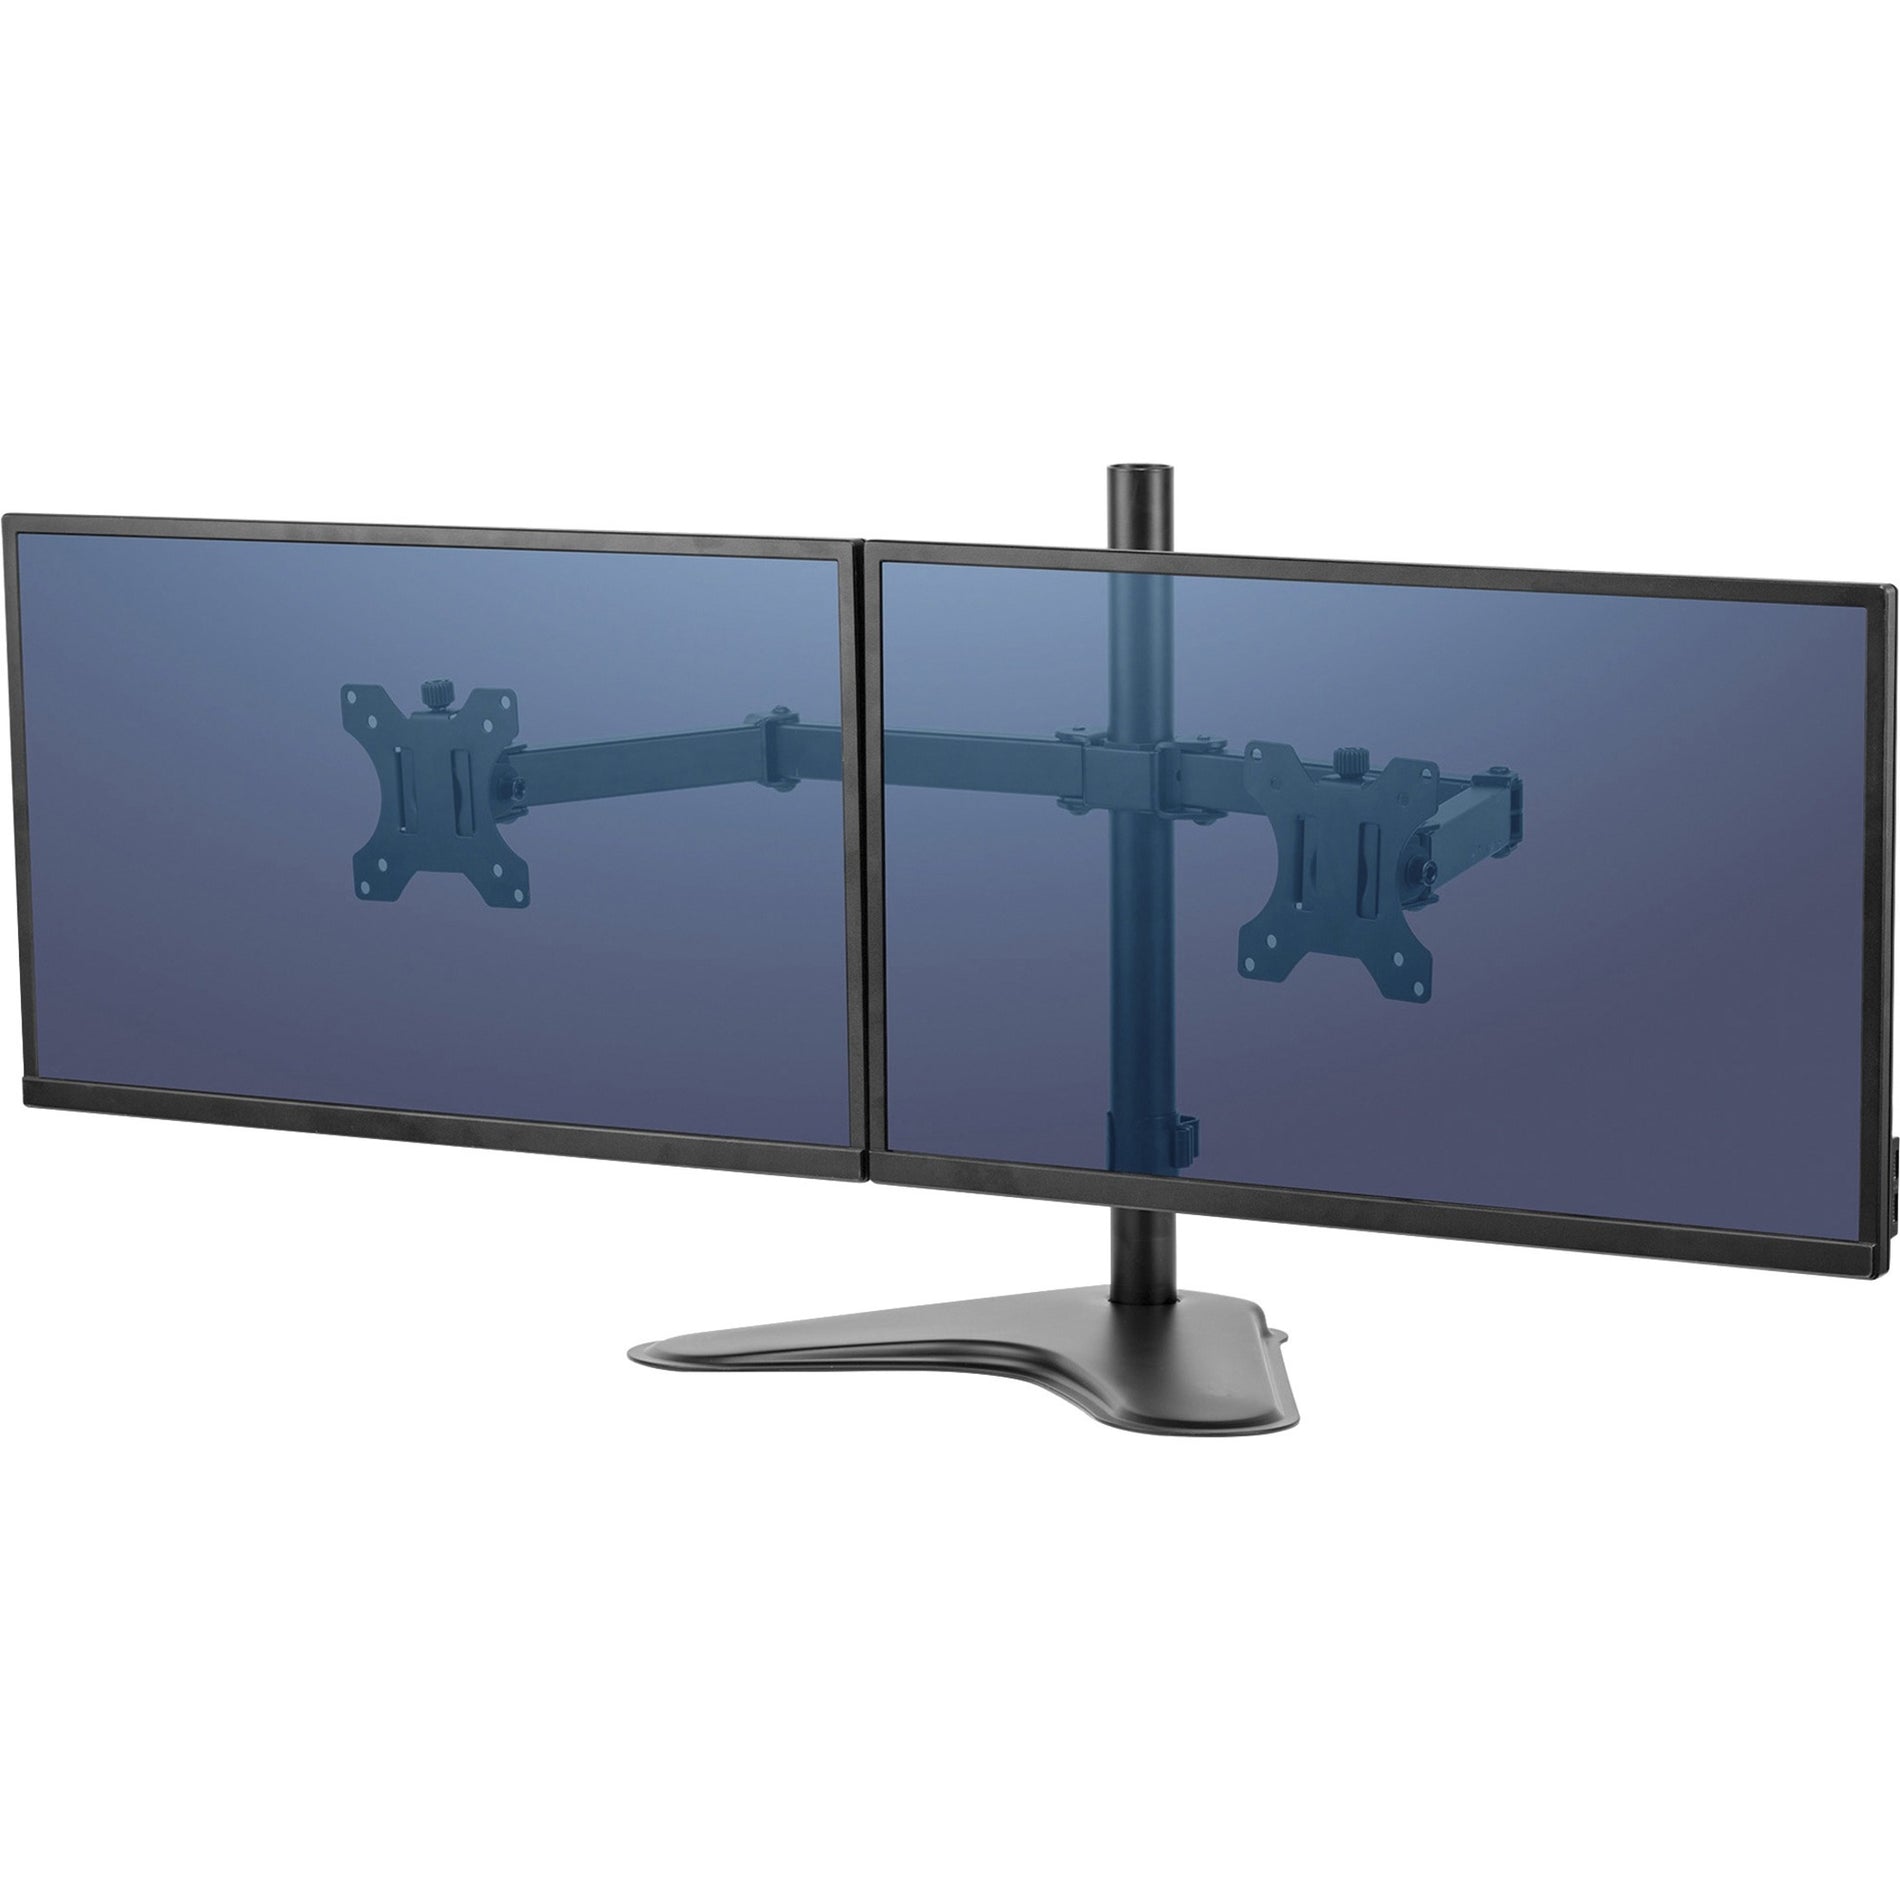 Fellowes 8043701 Professional Series Dual Horizontal Monitor Arm, Weighted Base, Cable Management